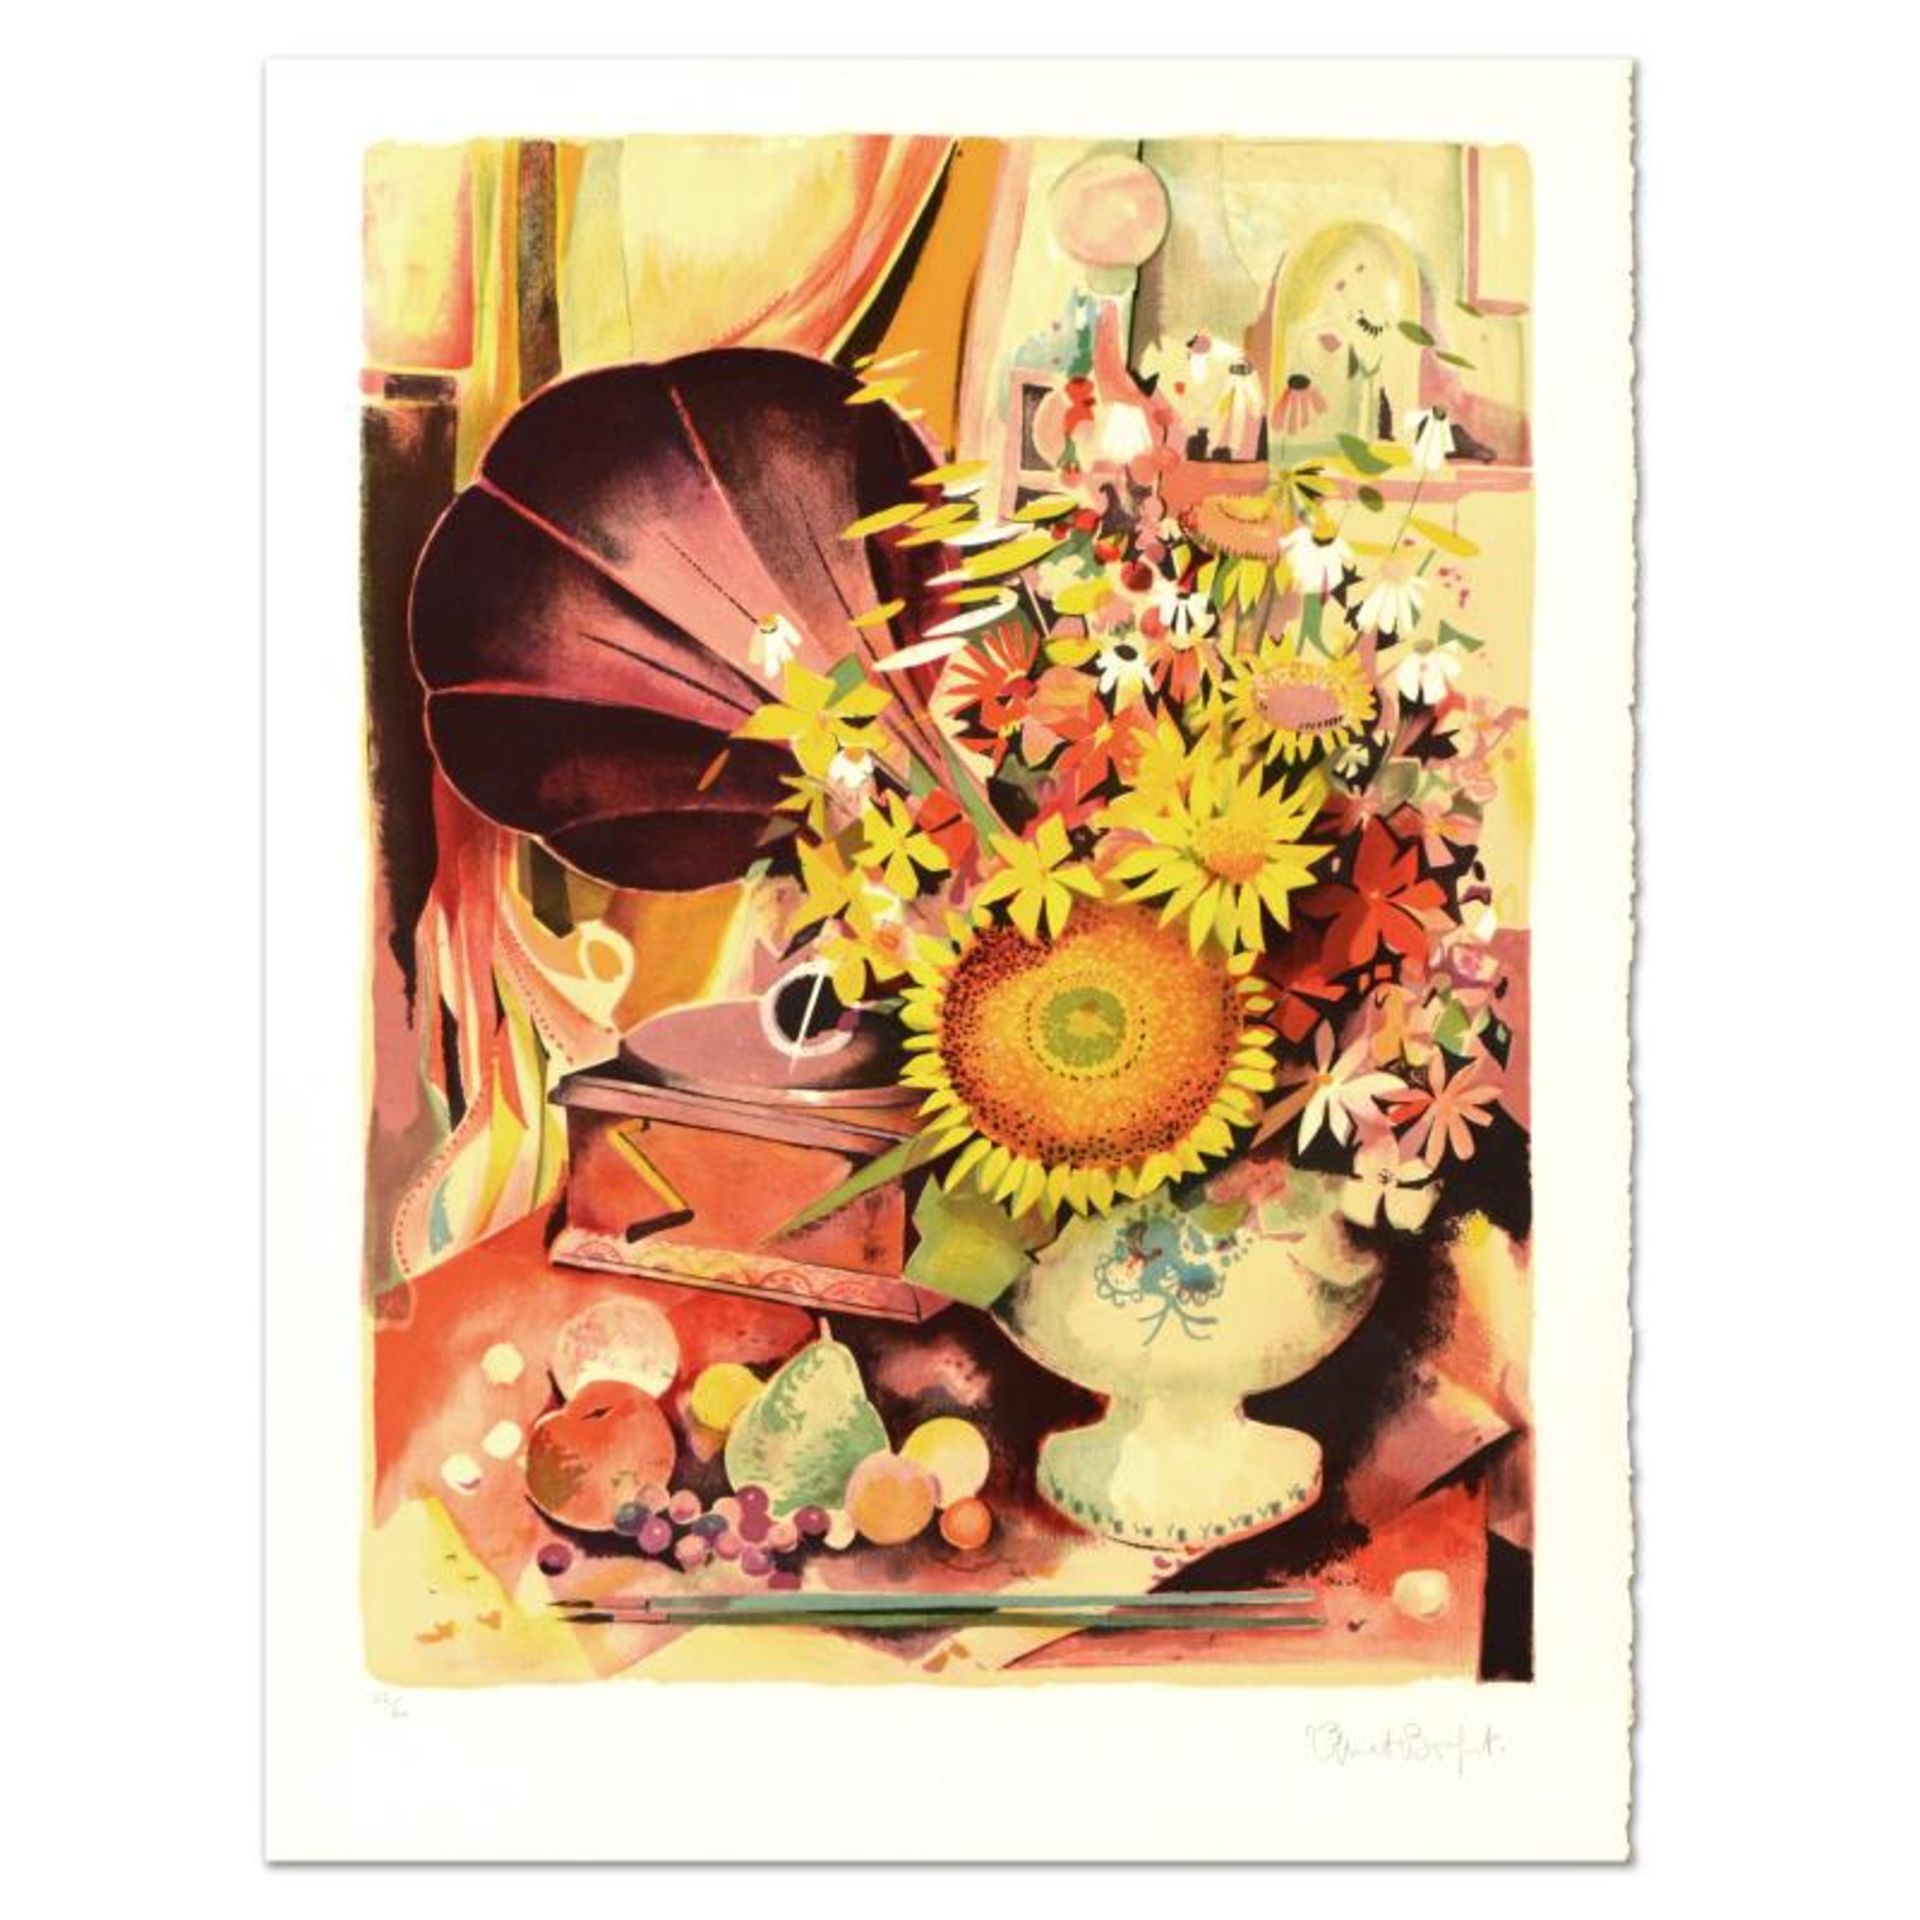 Robert Vernet Bonfort, "Bouquet" Limited Edition Lithograph, Numbered and Hand S